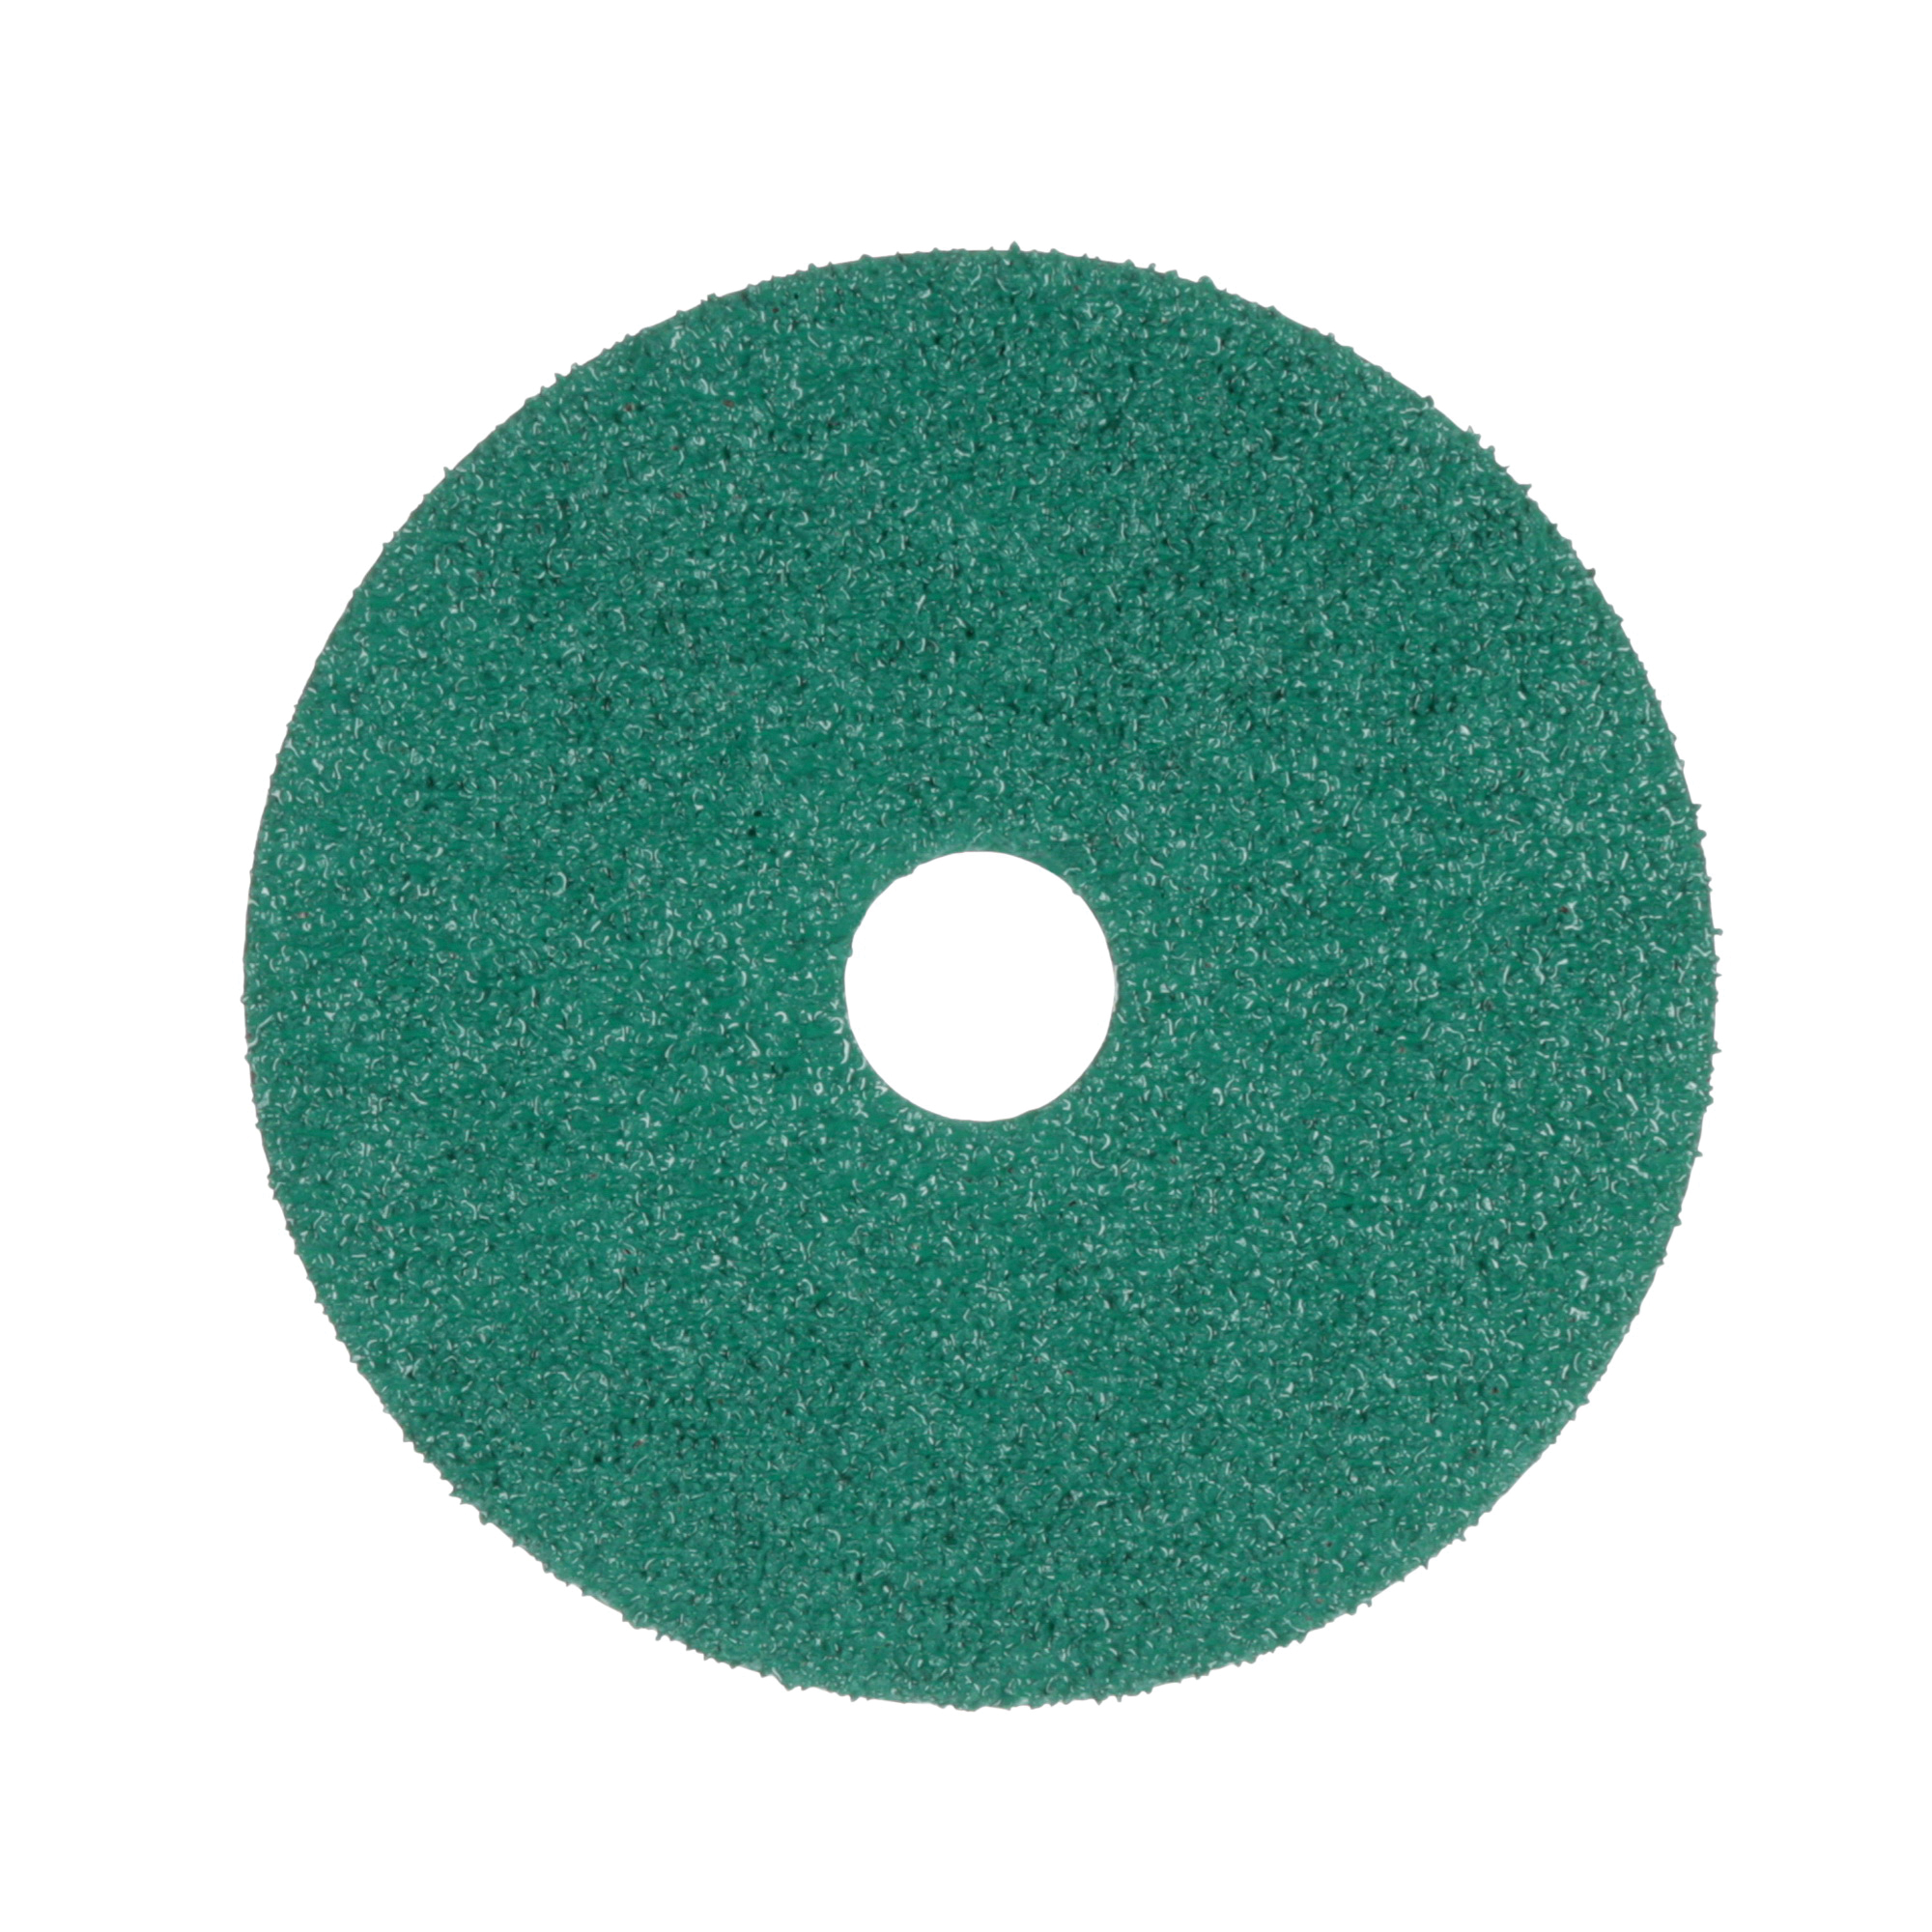 Green Corps™ 051131-01914 Coated Abrasive Disc, 5 in Dia, 7/8 in Center Hole, 36 Grit, Extra Coarse Grade, Ceramic Abrasive, Hub and Retainer Nut Attachment